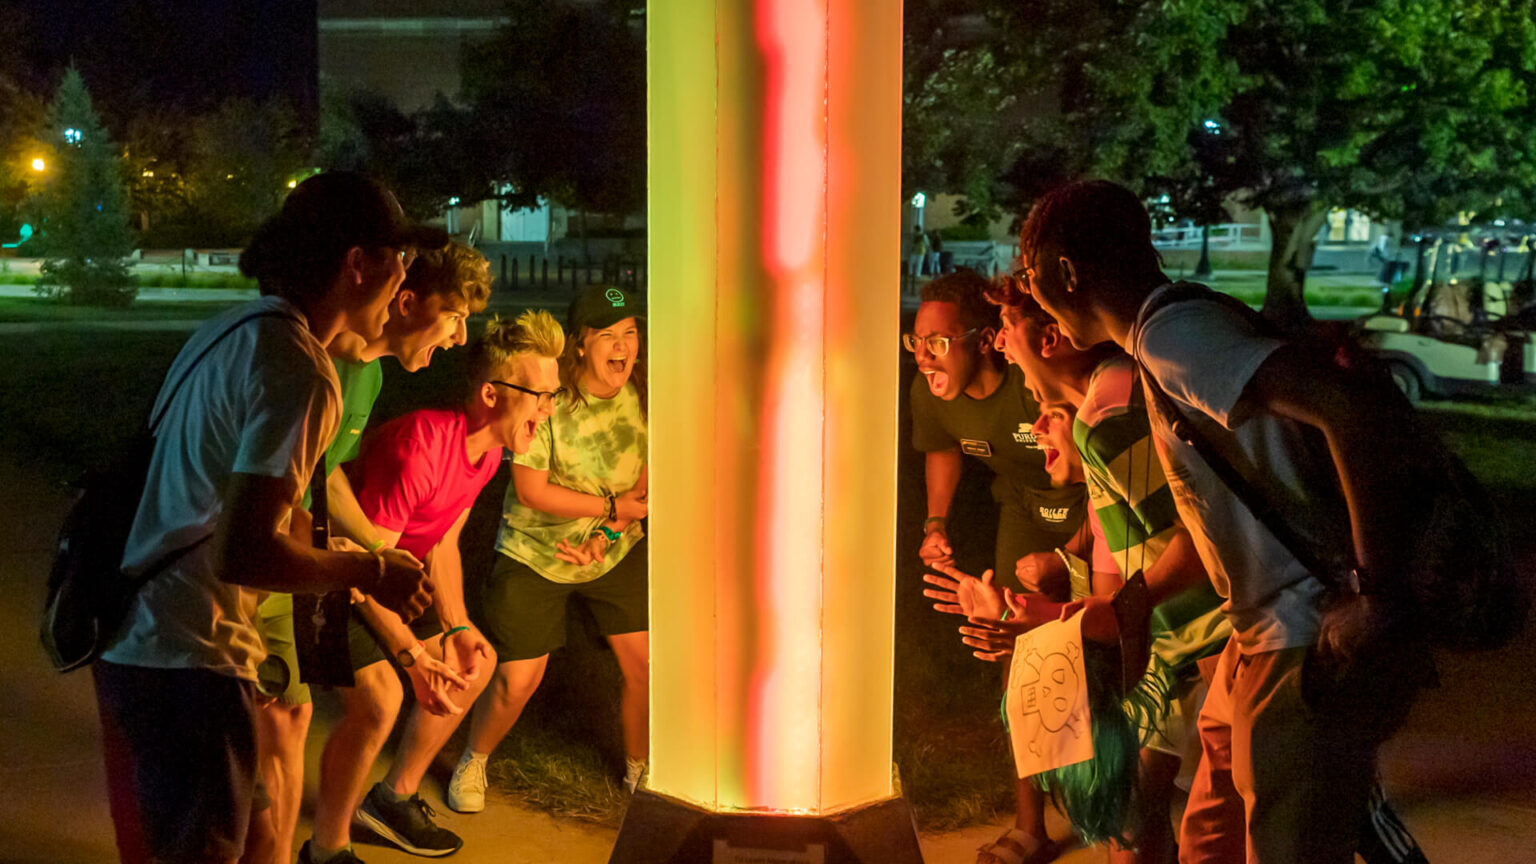 Image showing students gathered around large colorful glowing pole, excitedly yelling